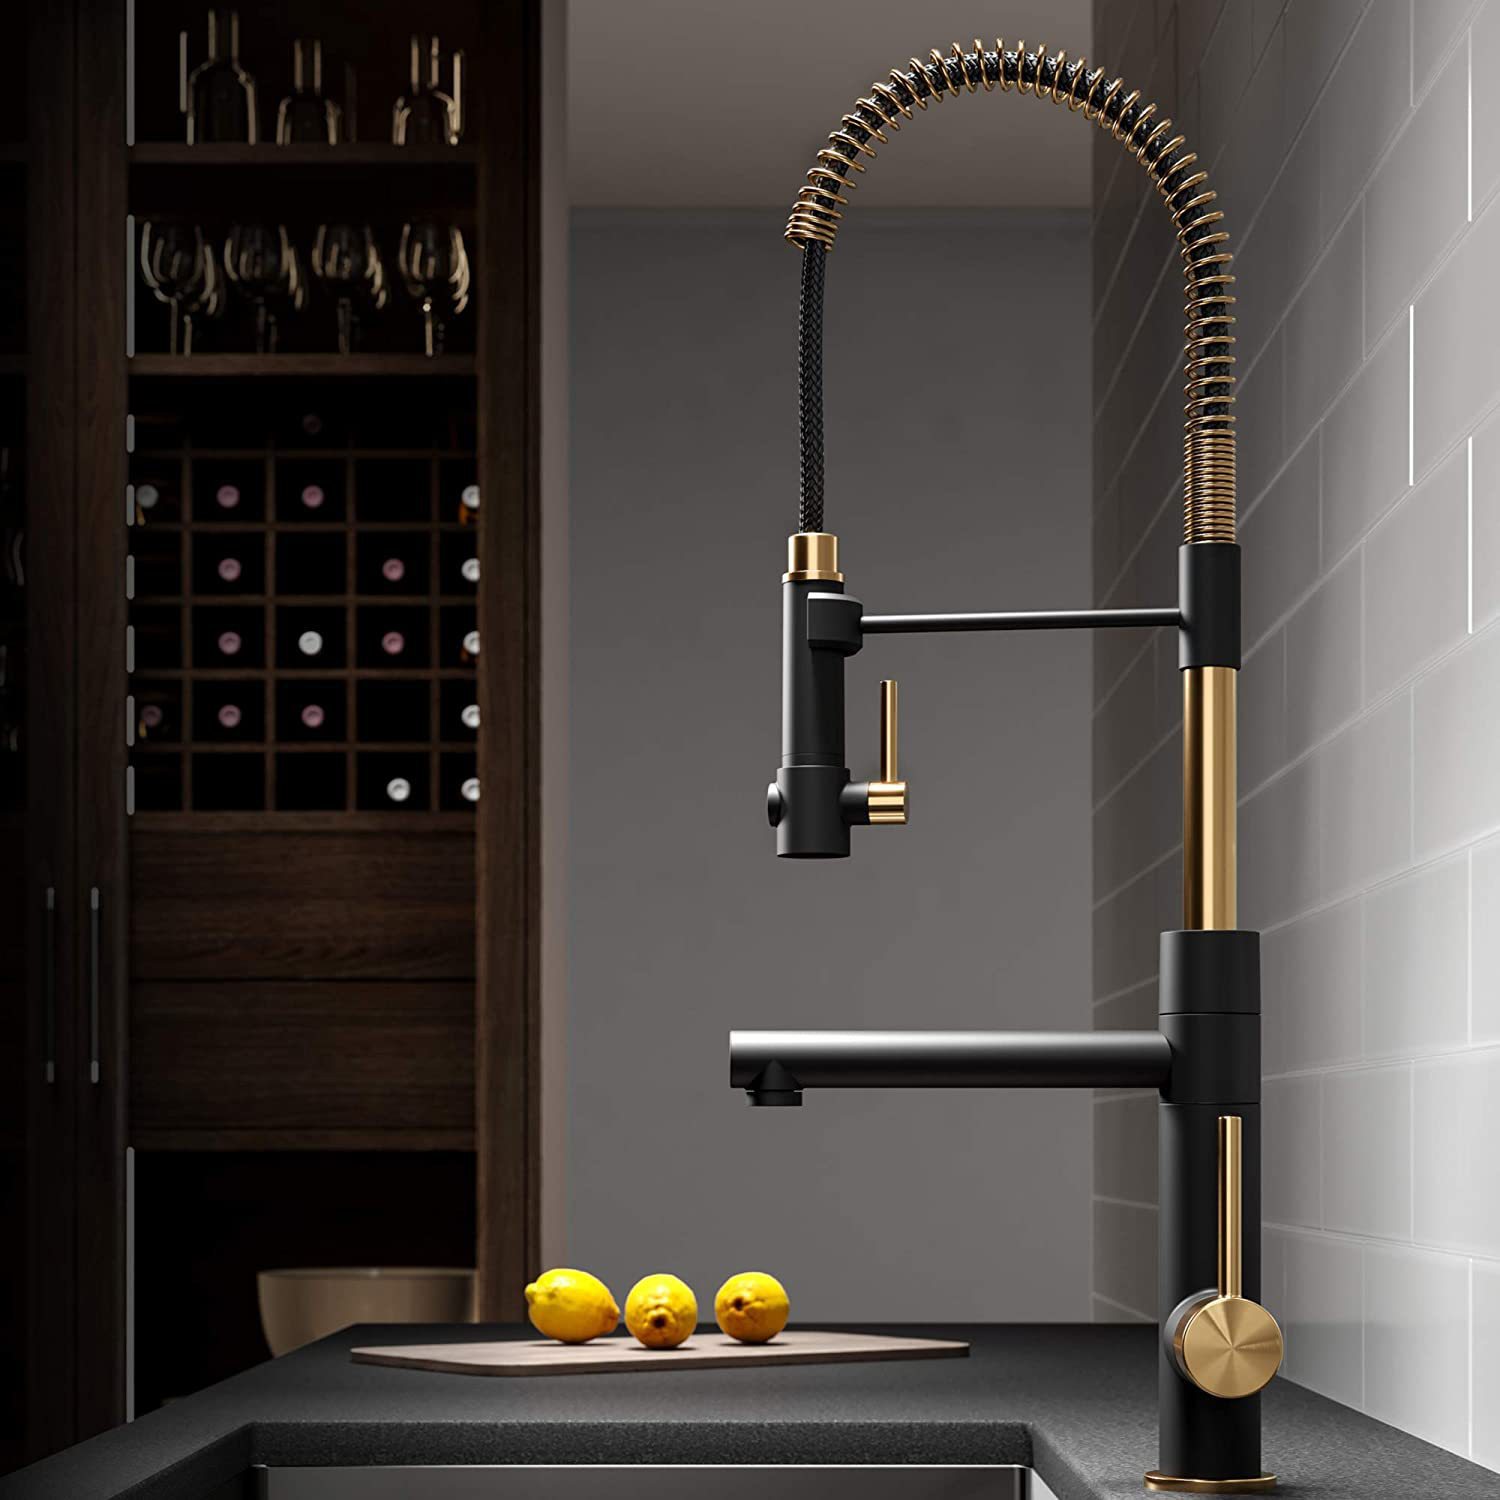 Aquacubic Sell Well Black and Gold Pull Down Sprayer Spring Mixer Tap Dual Head Brass Kitchen Faucet with Drinkng Spout